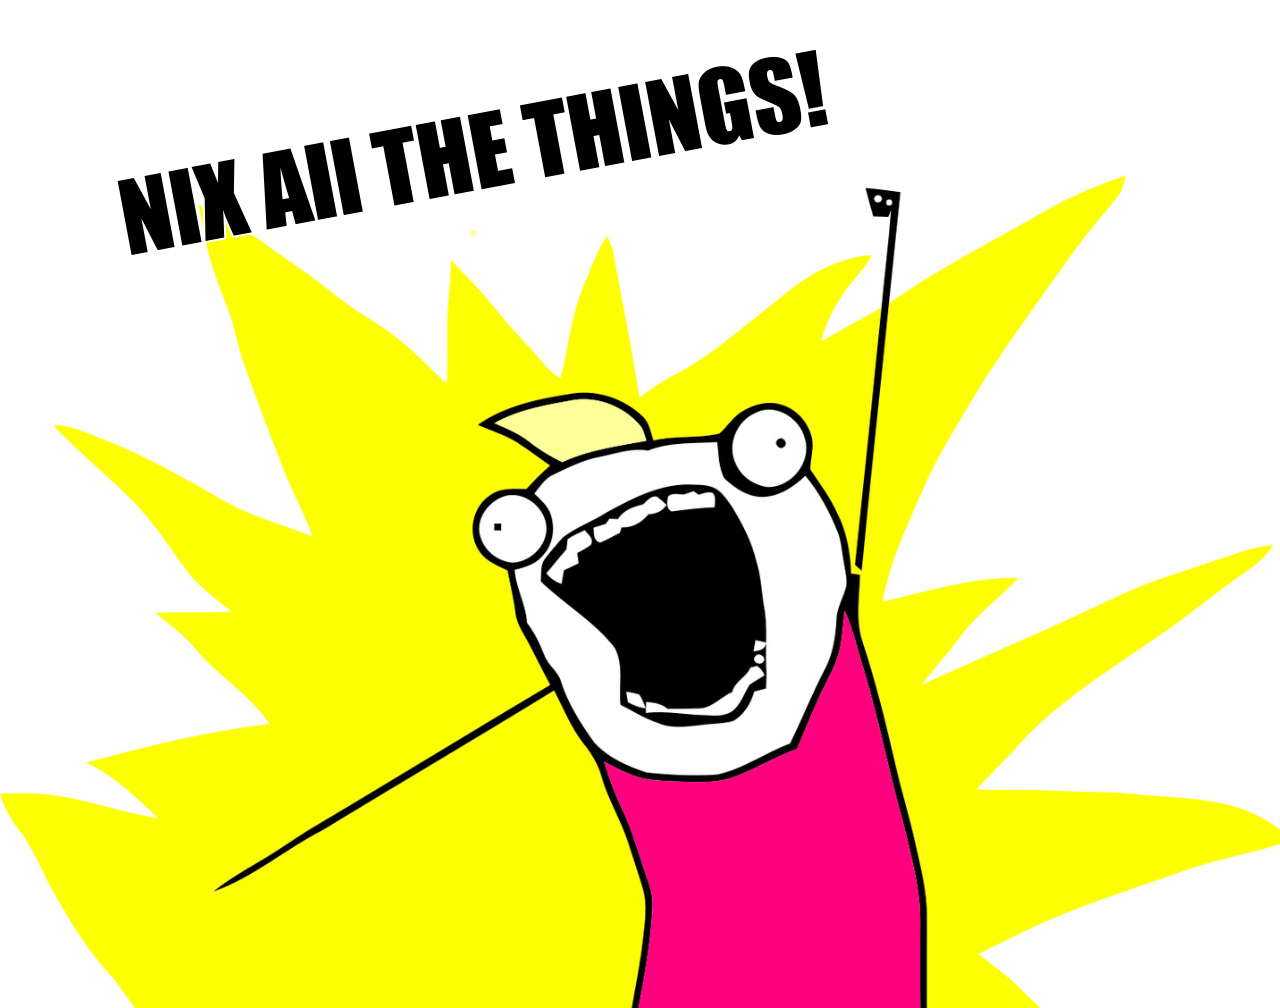 All the things meme template with the caption: 'Nix all the things!'